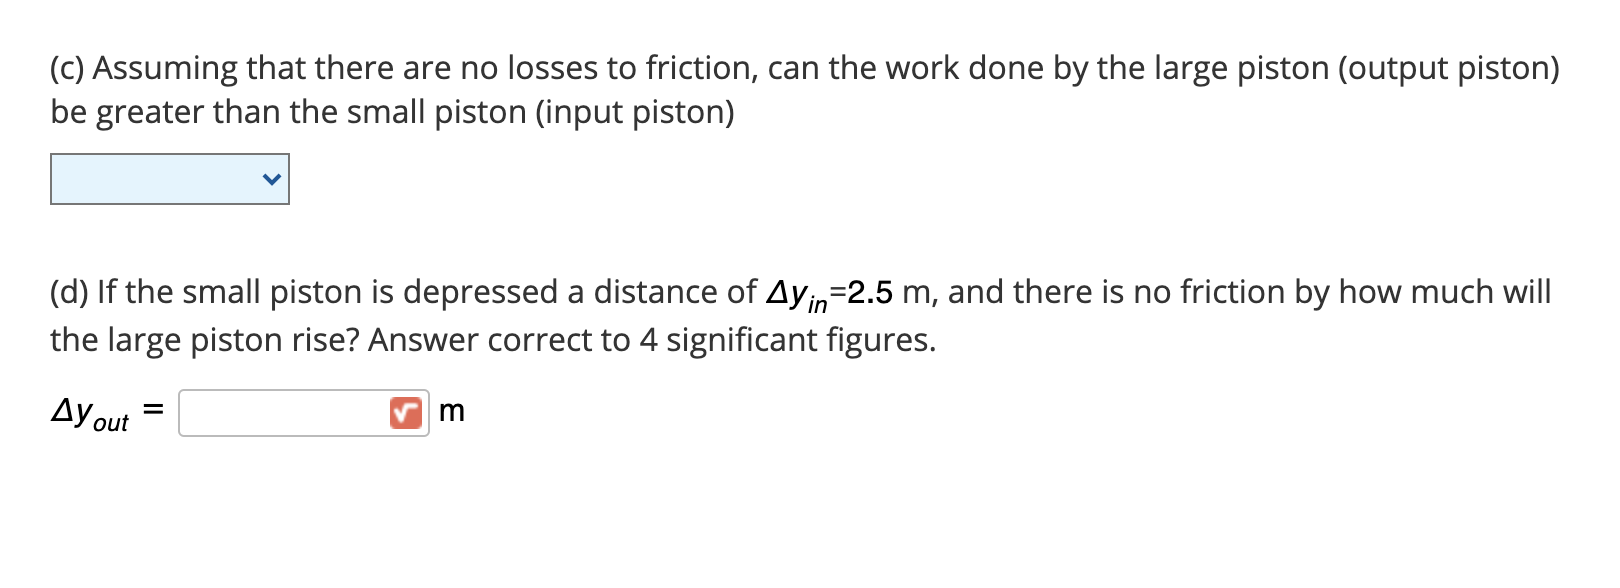 (d) If the small piston is depressed a distance of Ayin=2.5 m, and there is no friction by how much will
the large piston rise? Answer correct to 4 significant figures.
Ay out
